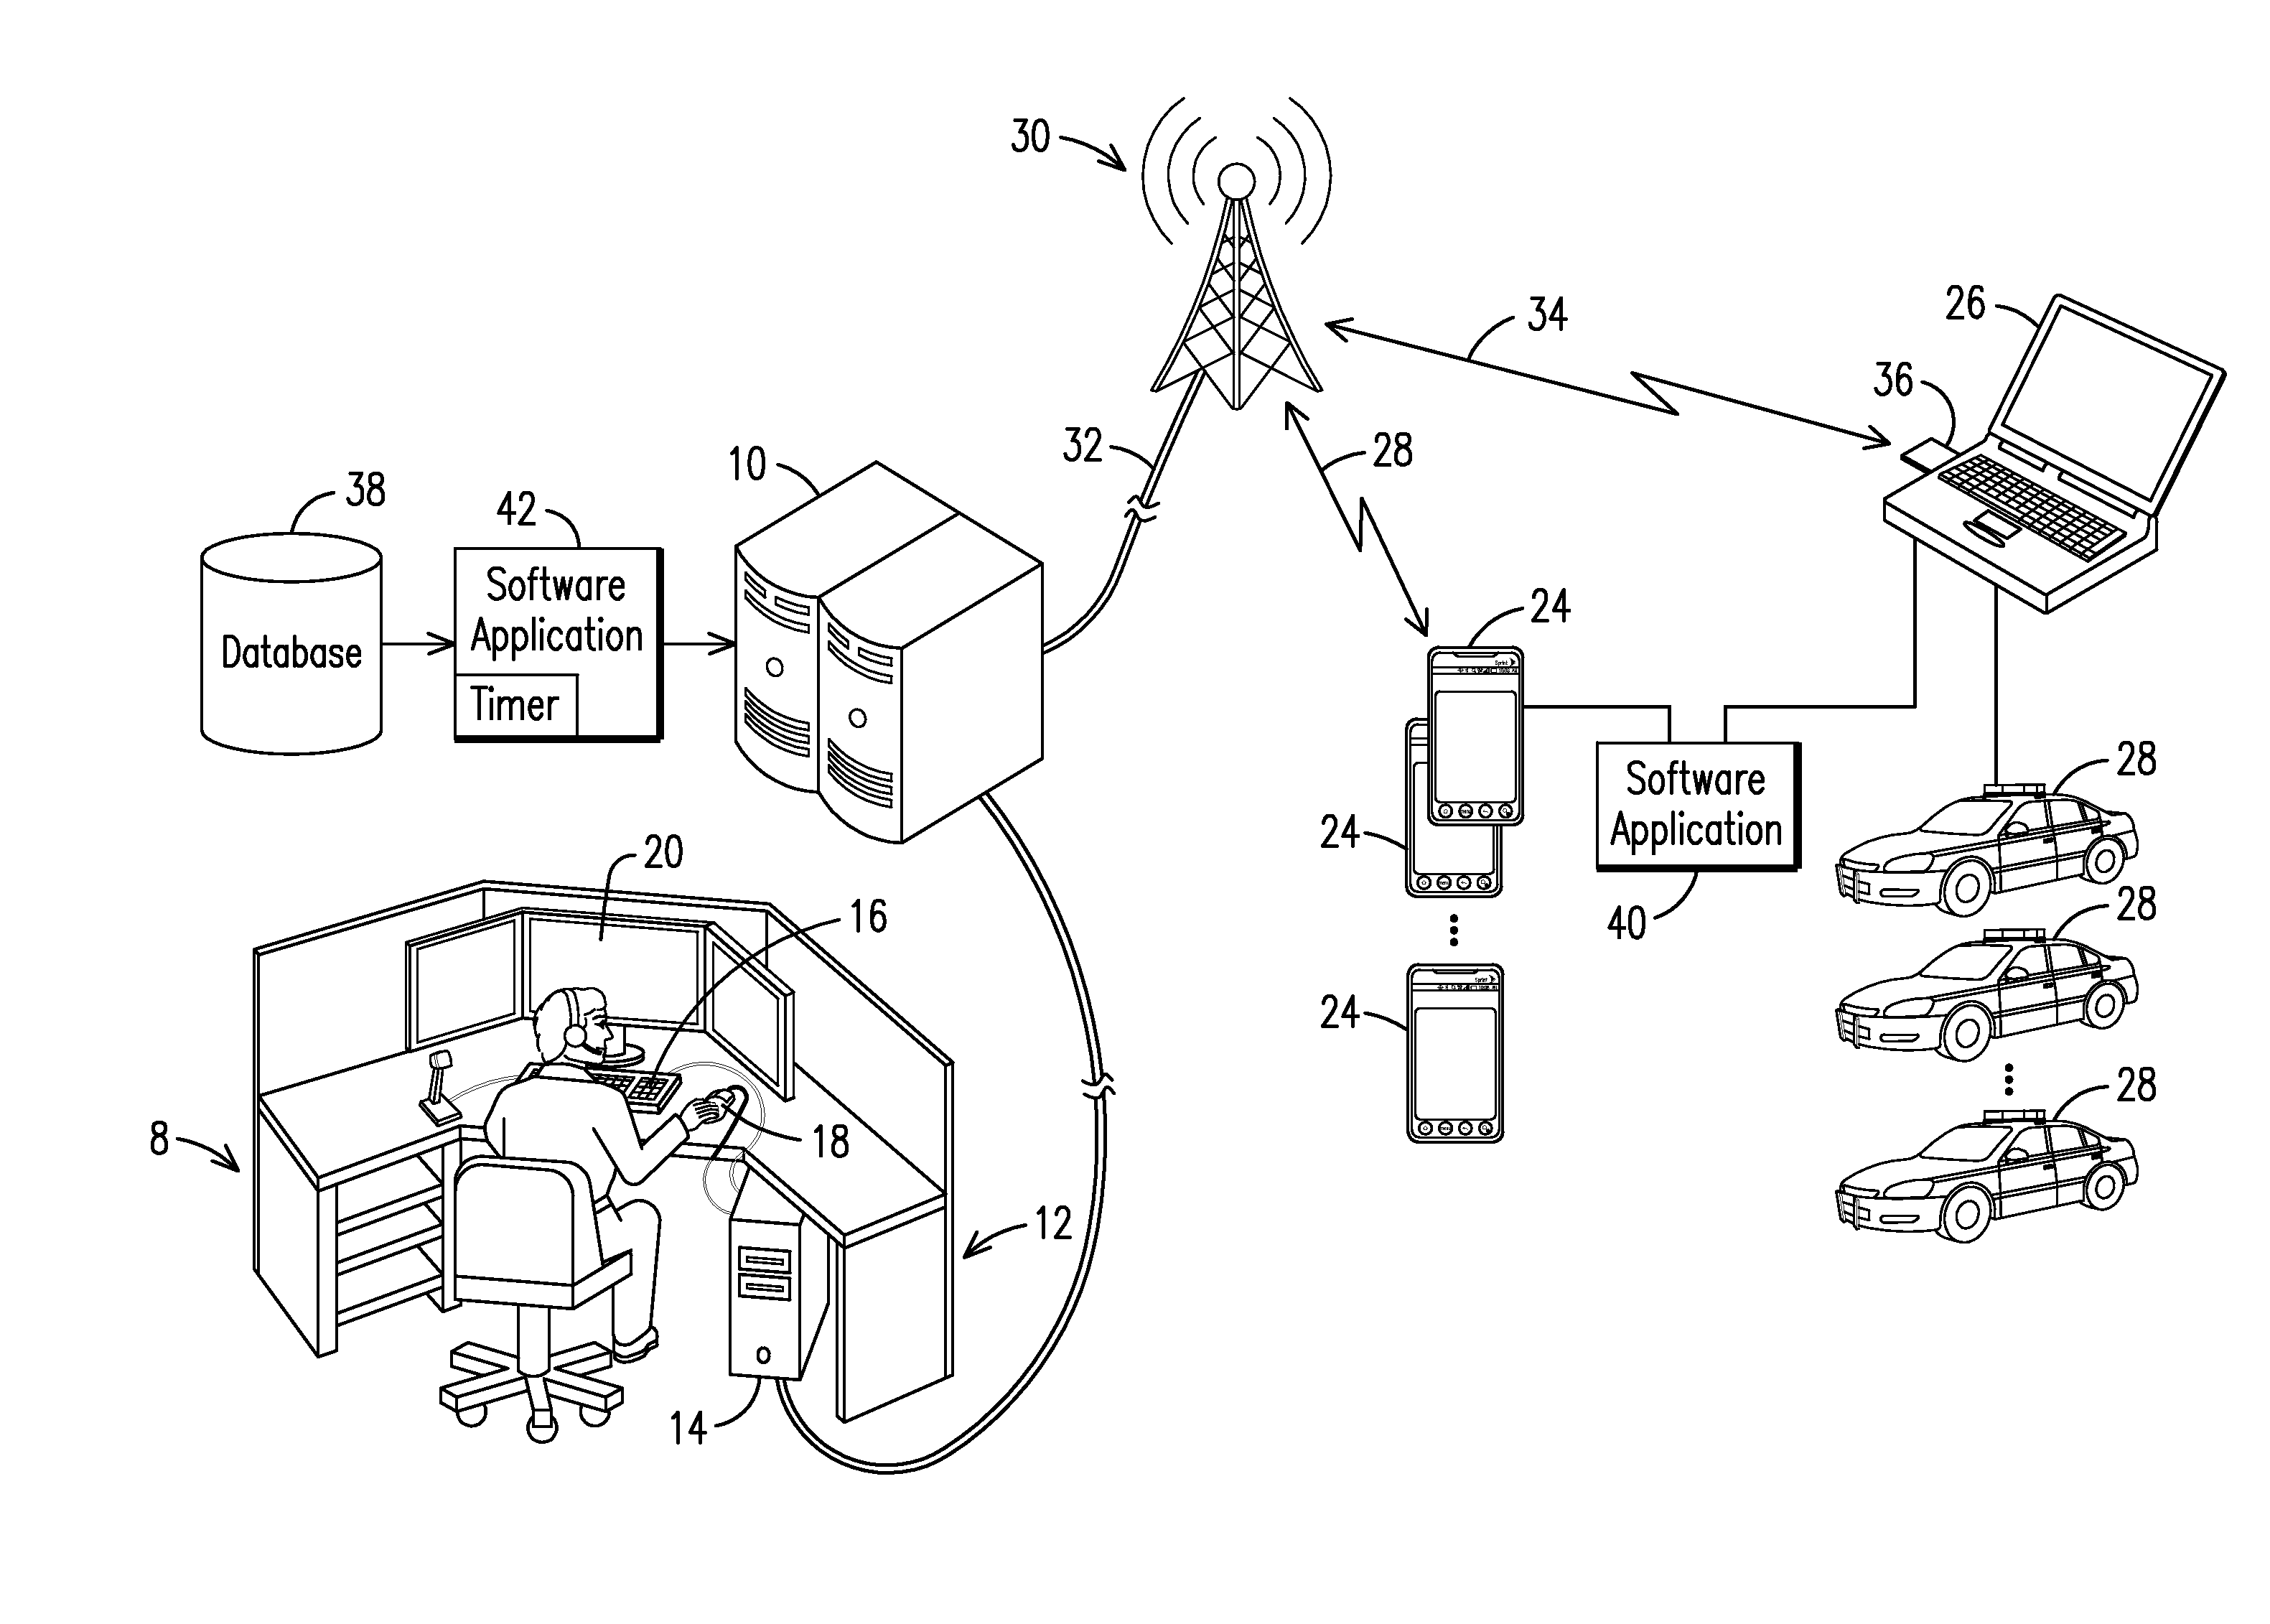 System and method for detecting and analyzing near range weapon fire